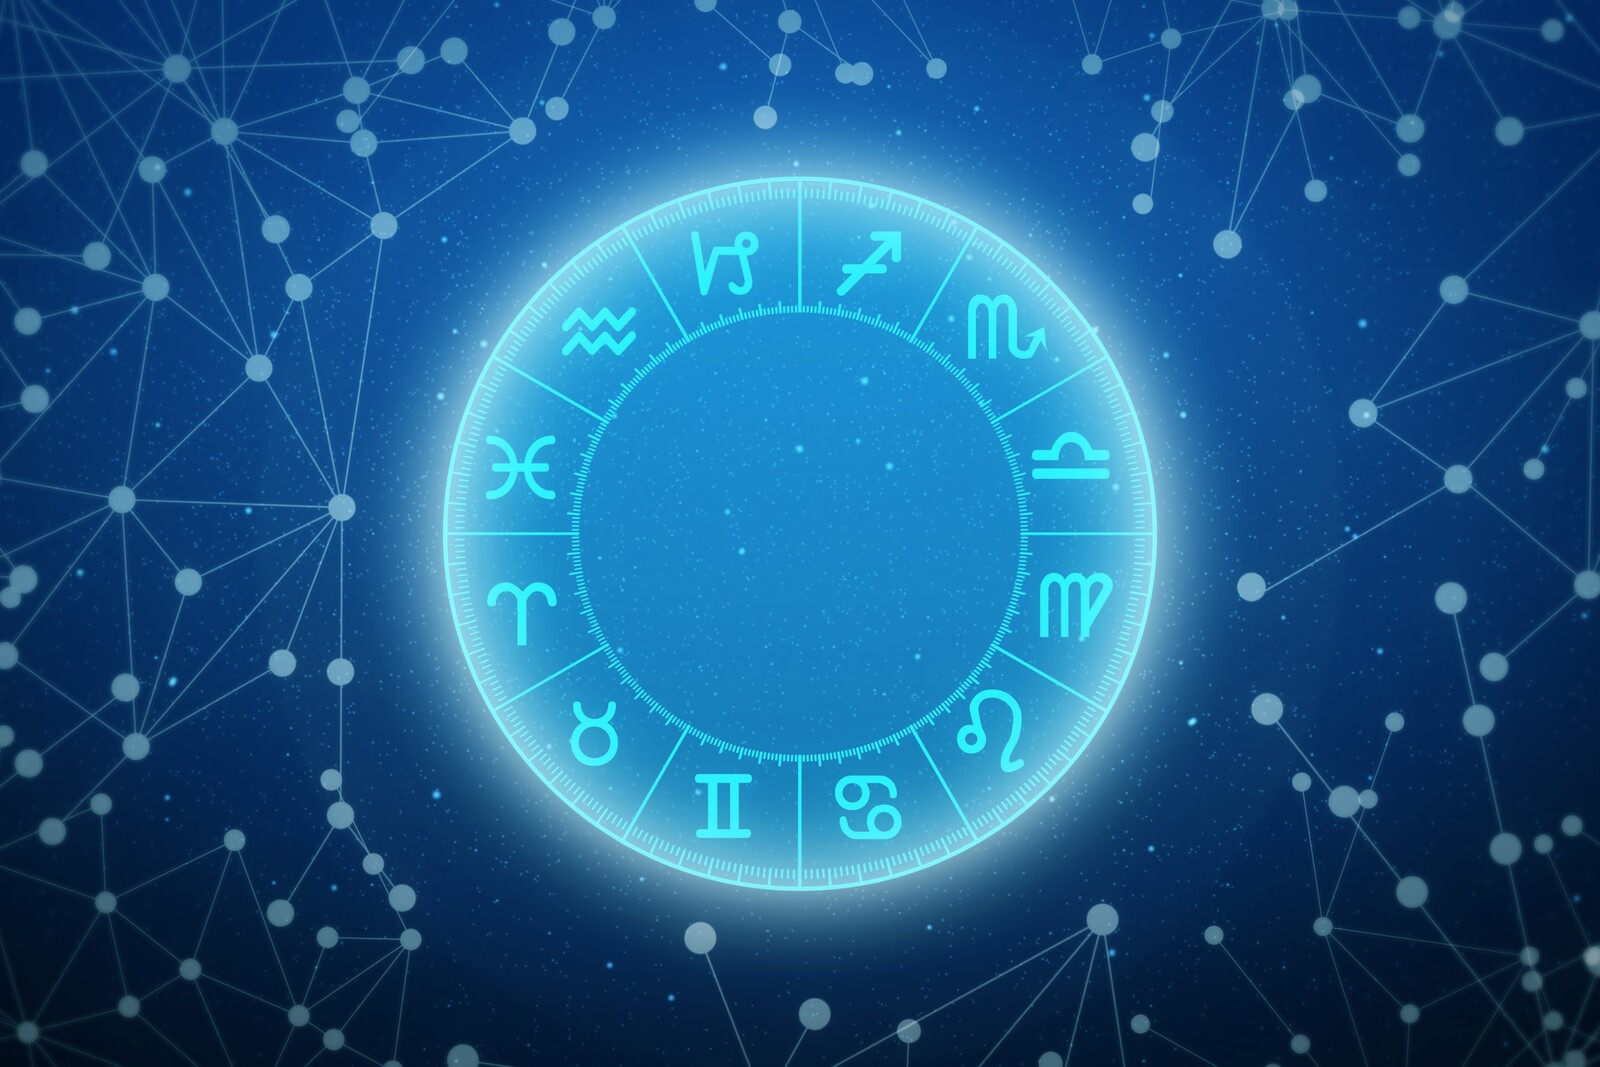 The 12 signs of the Zodiac on a neon blue wheel